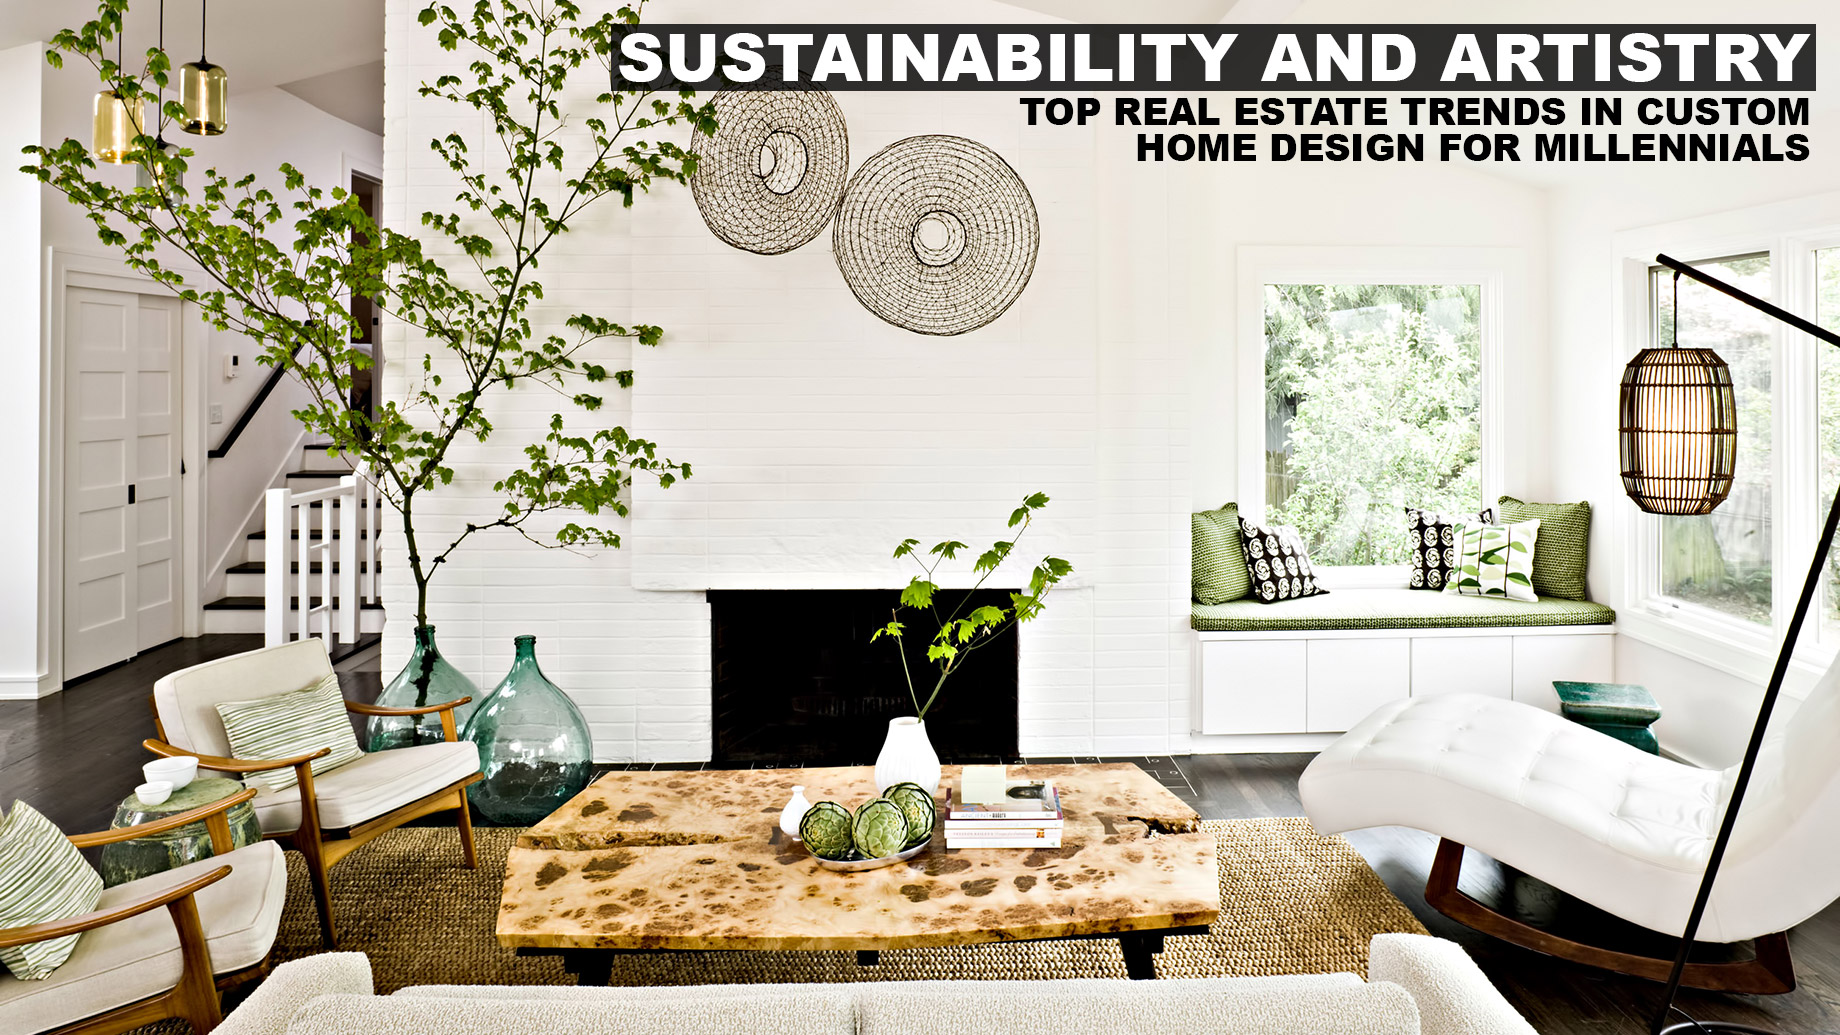 Sustainability and Artistry - Top Real Estate Trends in Custom Home Design For Millennials